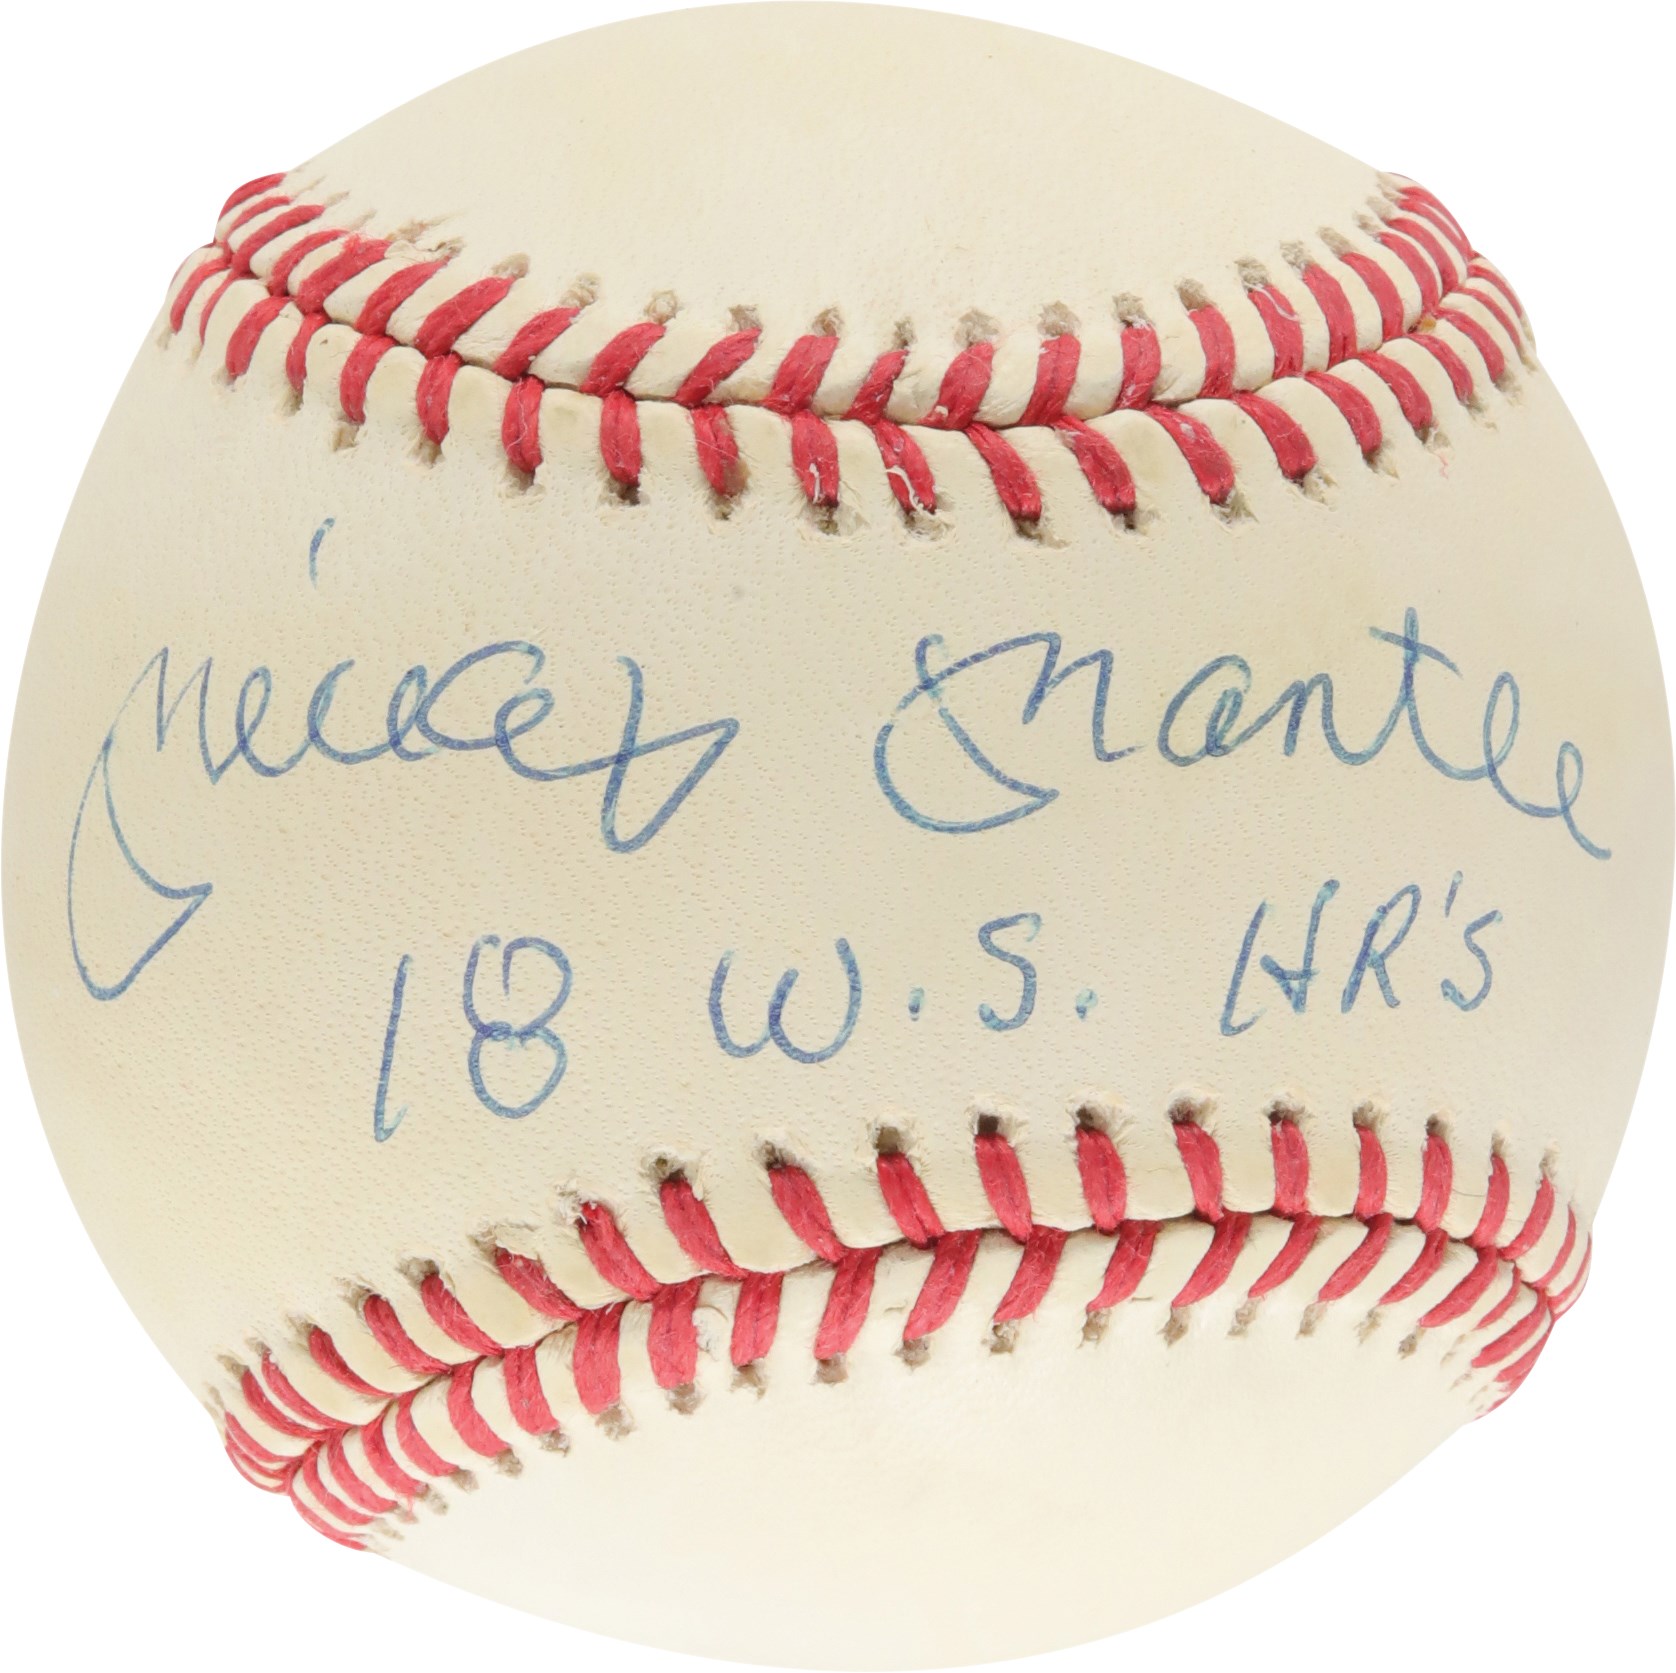 Mantle and Maris - Mickey Mantle "18 W.S. HR's" Single-Signed Baseball (PSA)